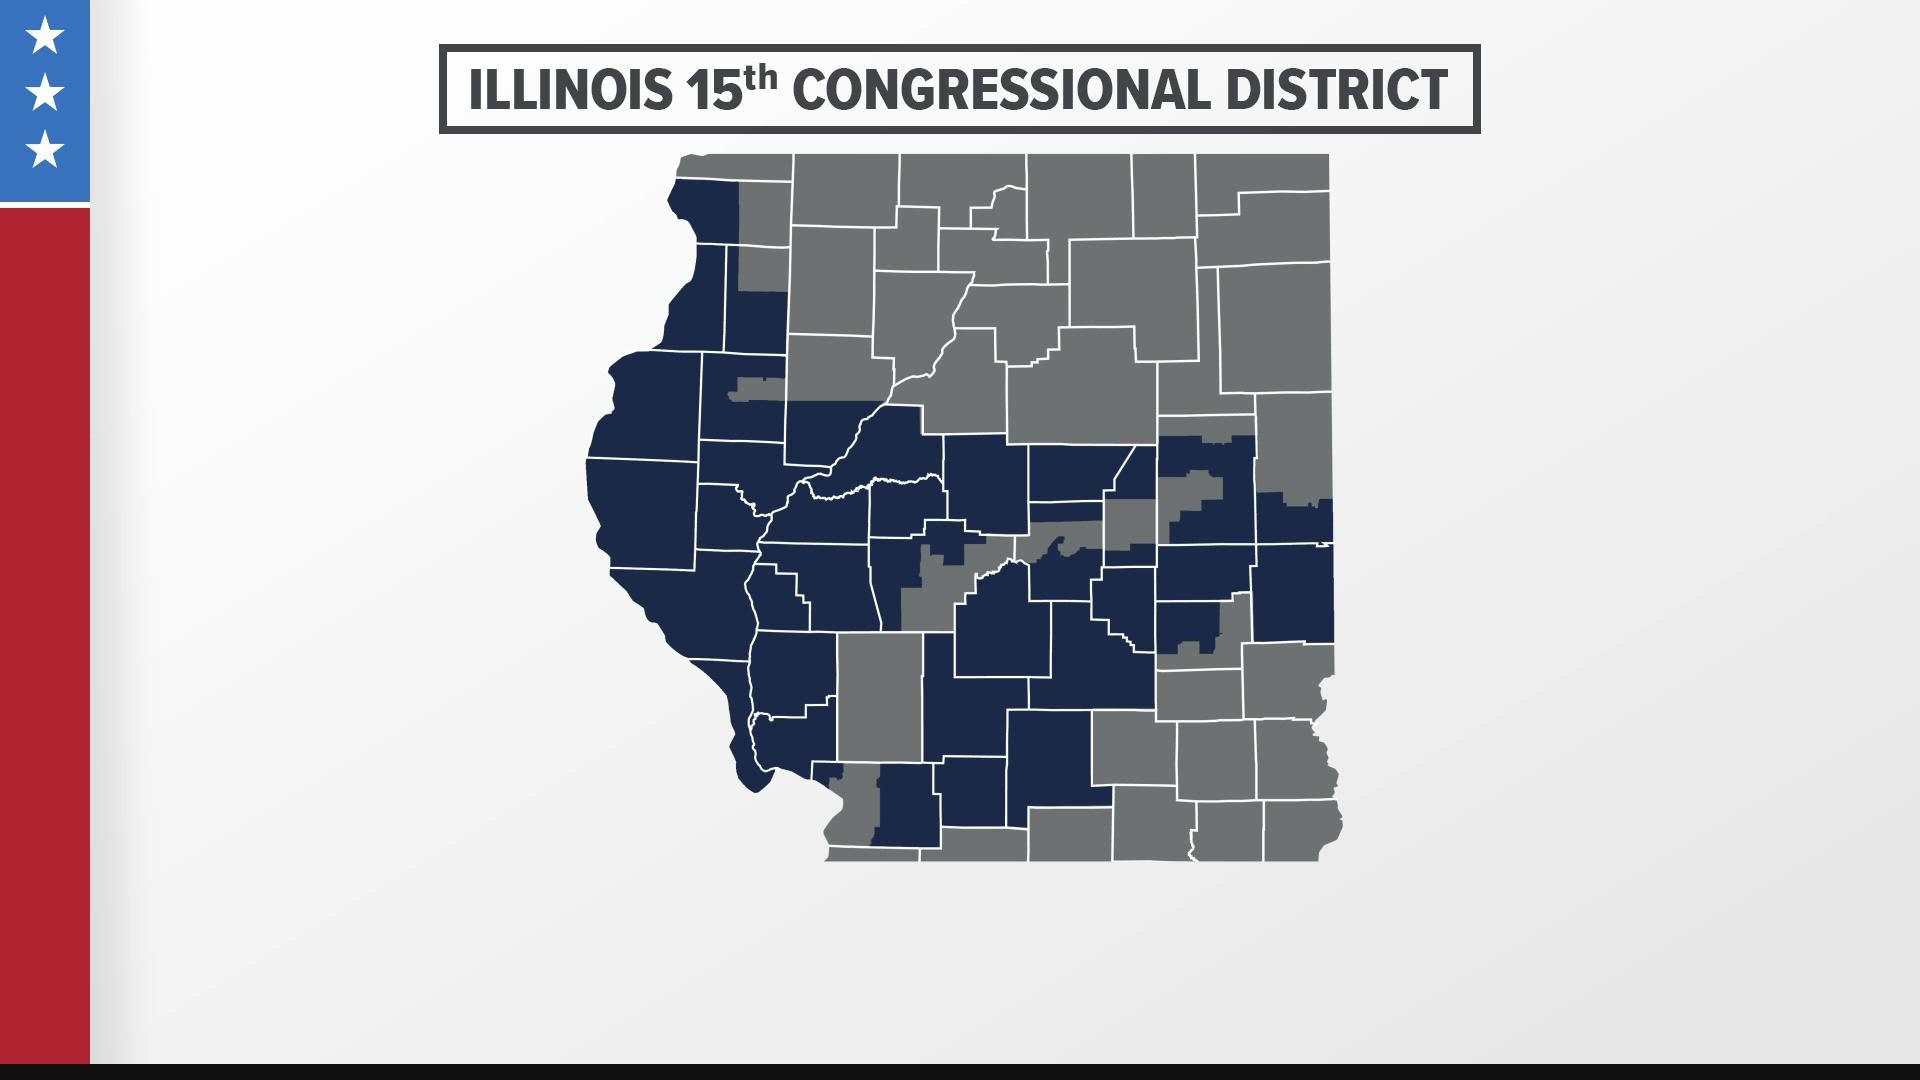 Miller will face Democrat Paul Lange who ran unopposed in the Democratic primary. Illinois' 15th District is heavily Republican.